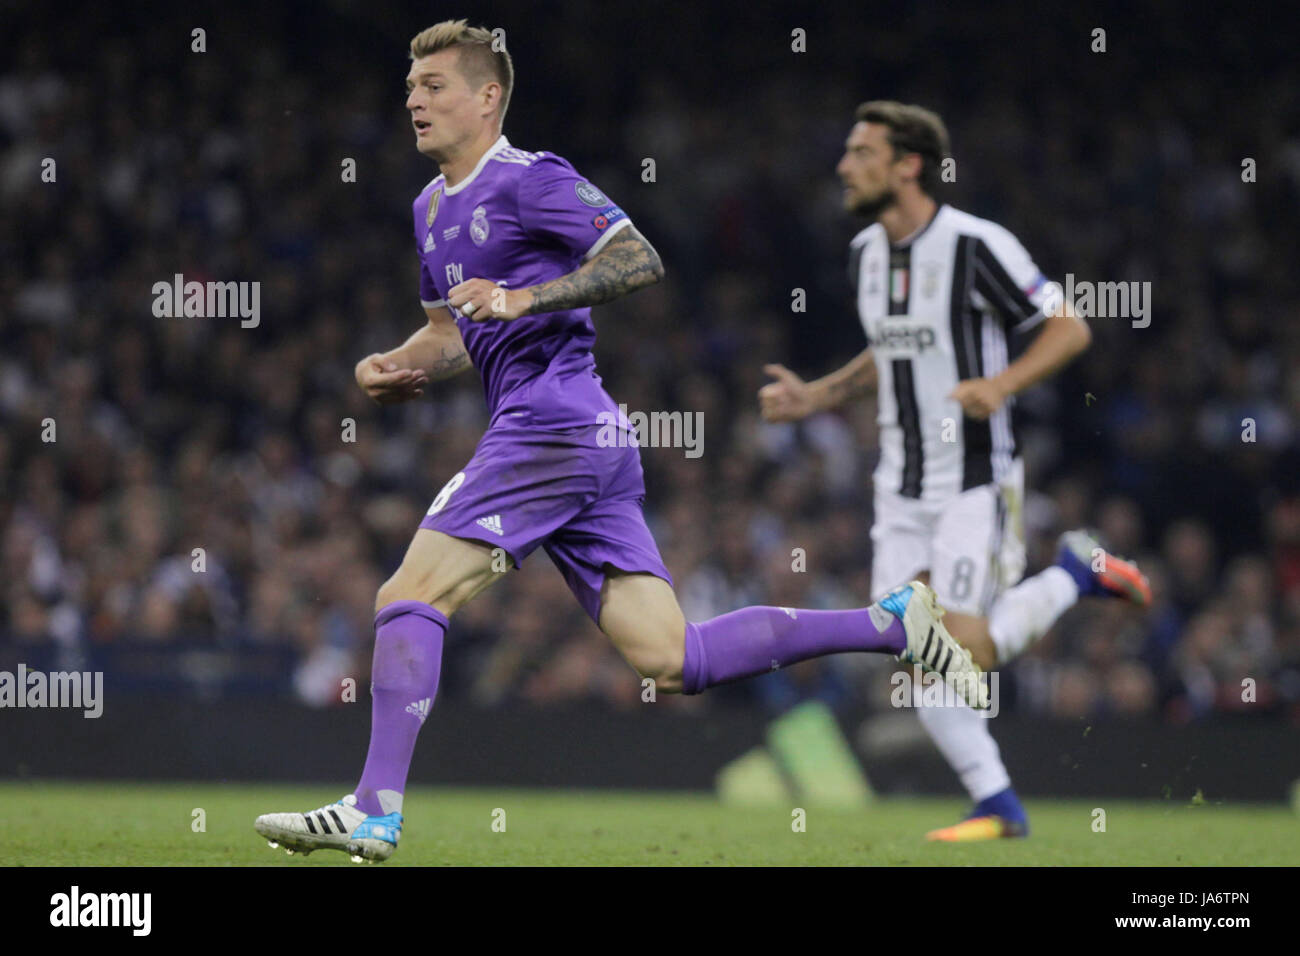 June 3rd 2017, Cardiff City Stadium, Wales; UEFA Champions League Final, Juventus FC versus Real Madrid Toni Kroos in action Stock Photo